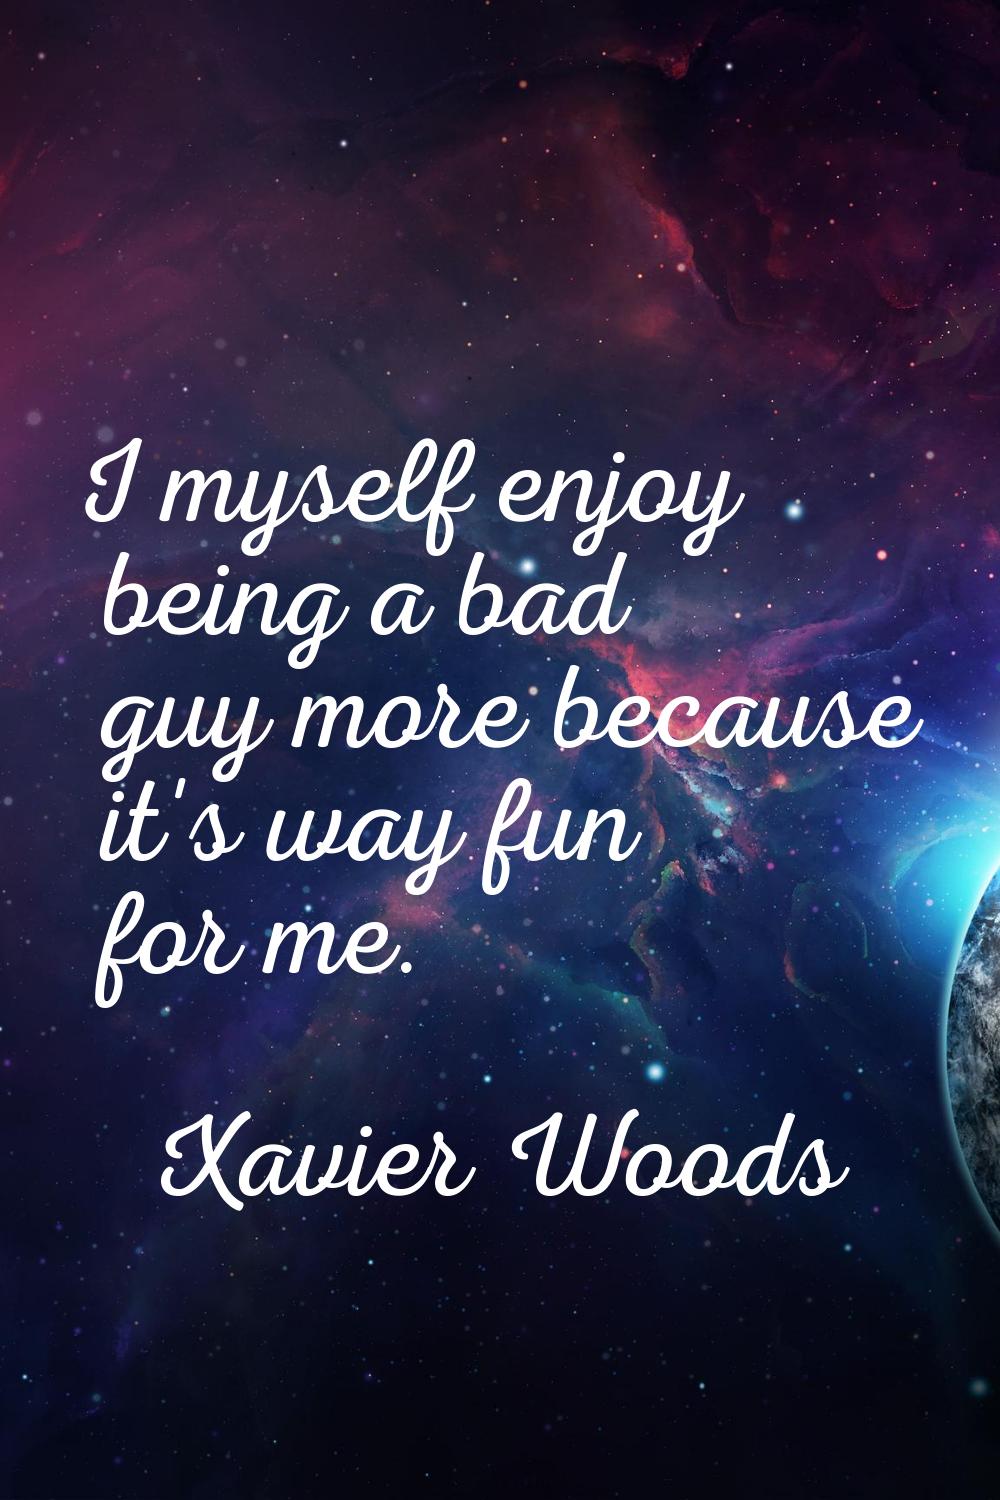 I myself enjoy being a bad guy more because it's way fun for me.